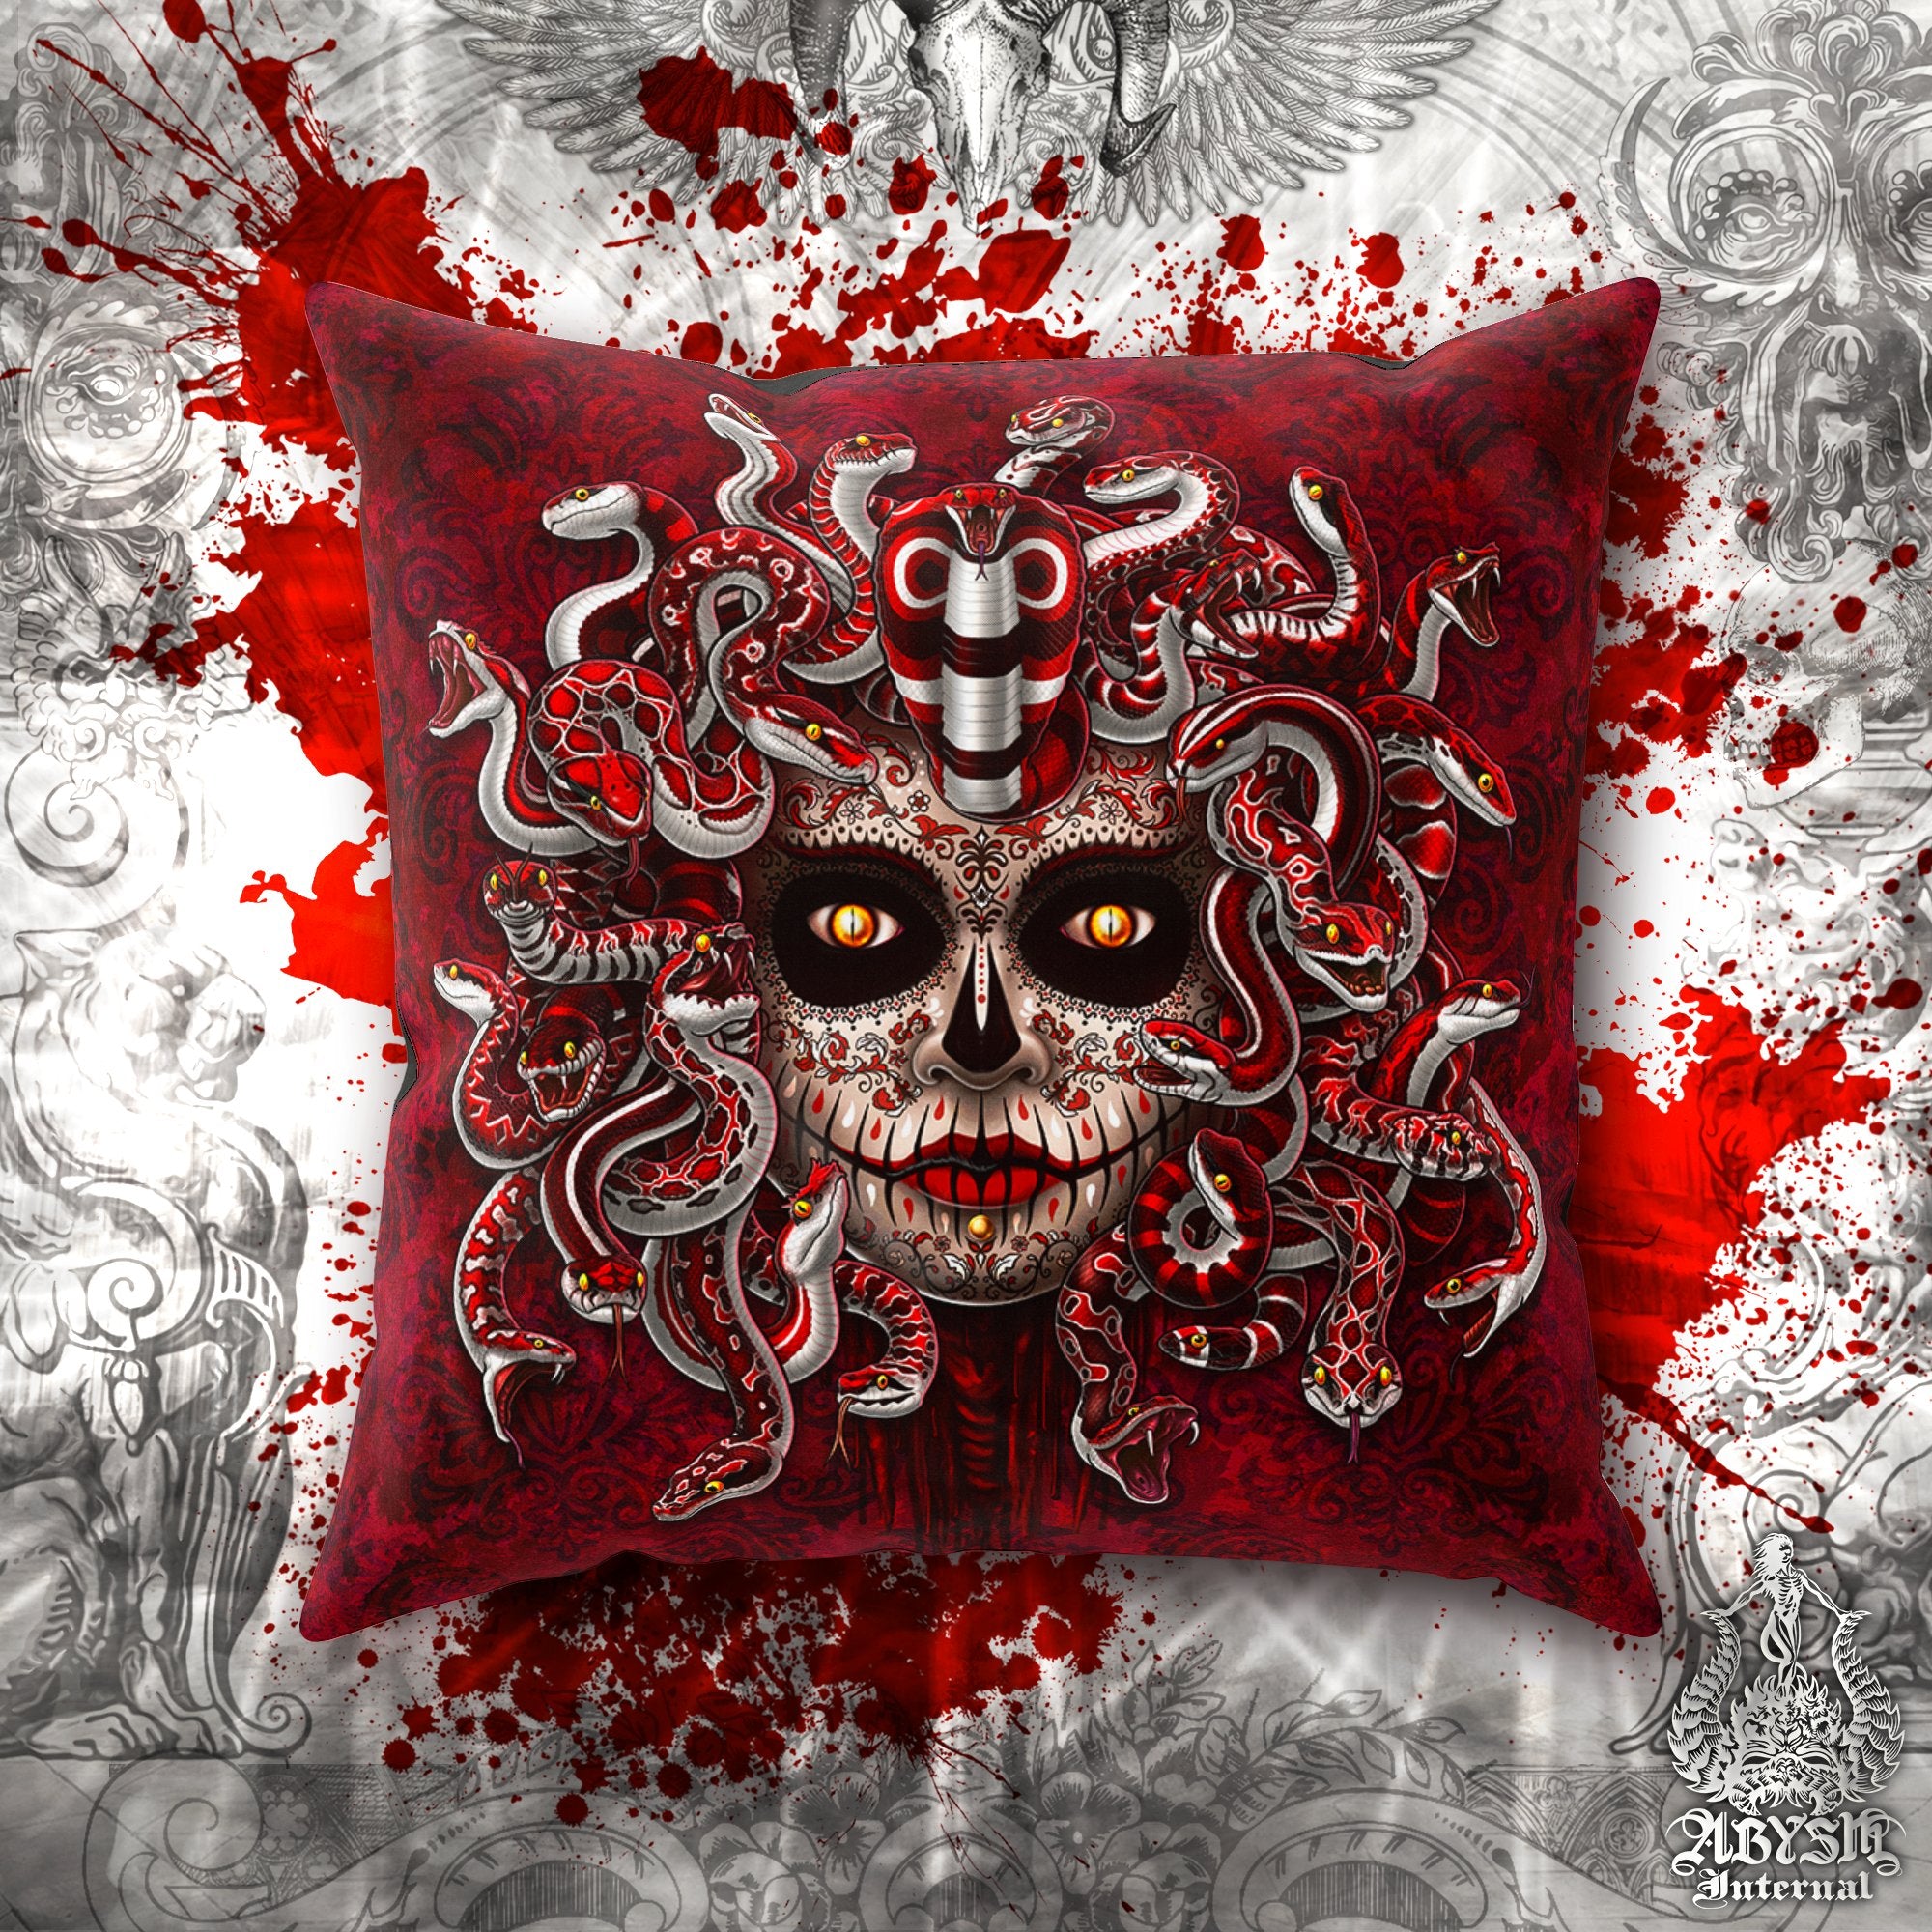 Catrina Throw Pillow, Decorative Accent Pillow, Square Cushion Cover, Medusa, Day of the Dead, Mexican Art, Alternative Home Decor - Red Snakes, 2 Faces - Abysm Internal